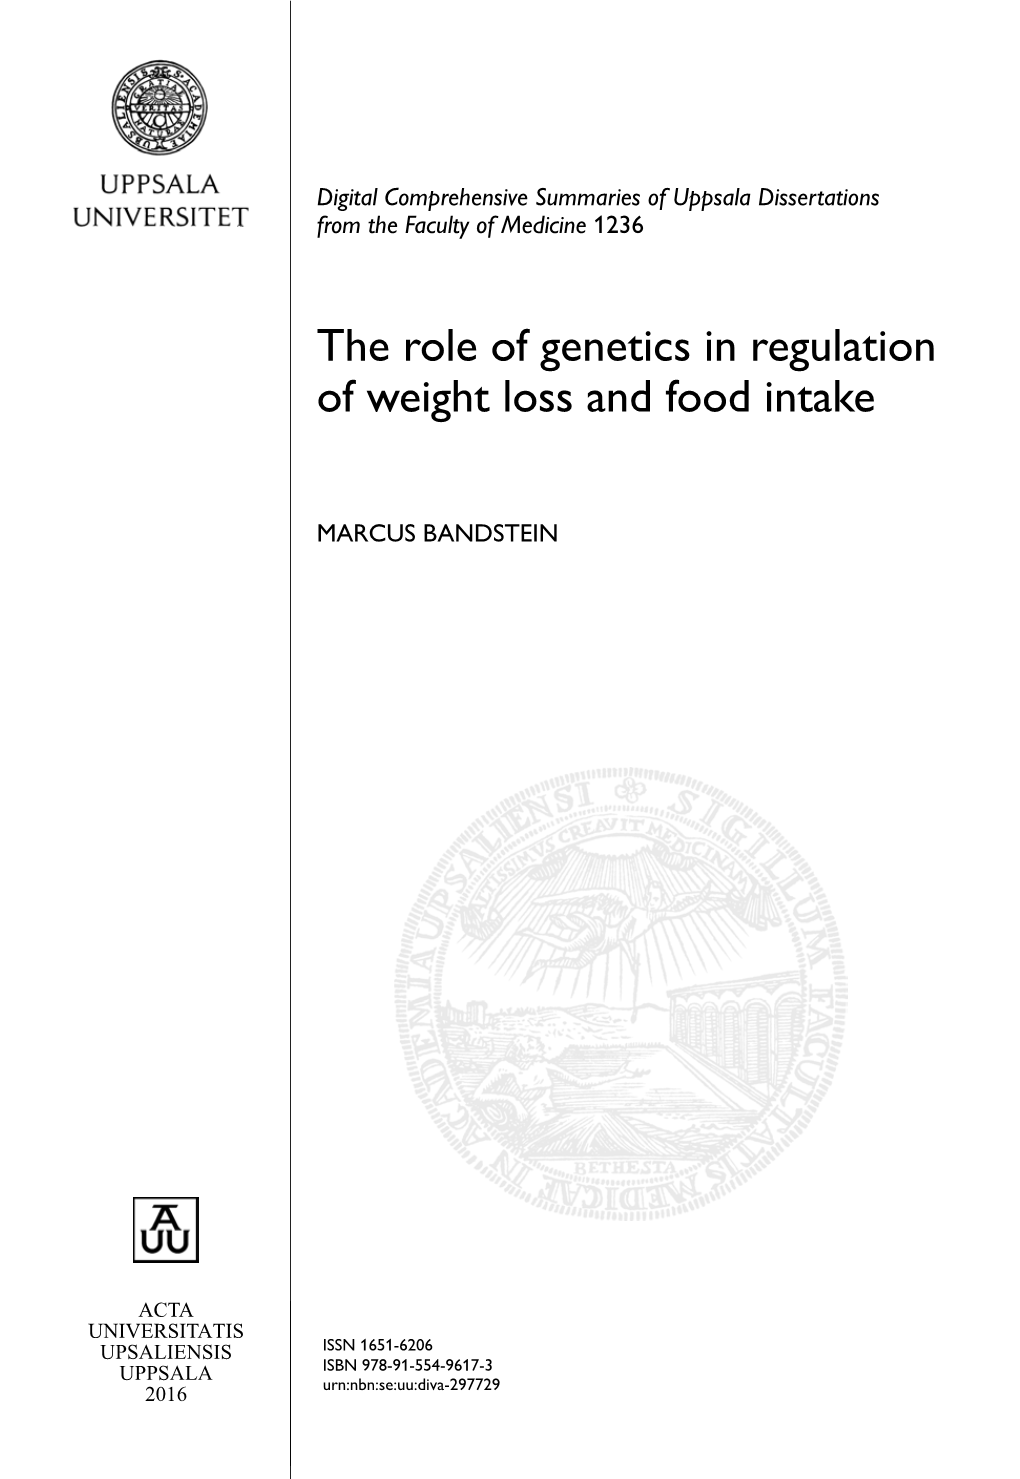 The Role of Genetics in Regulation of Weight Loss and Food Intake